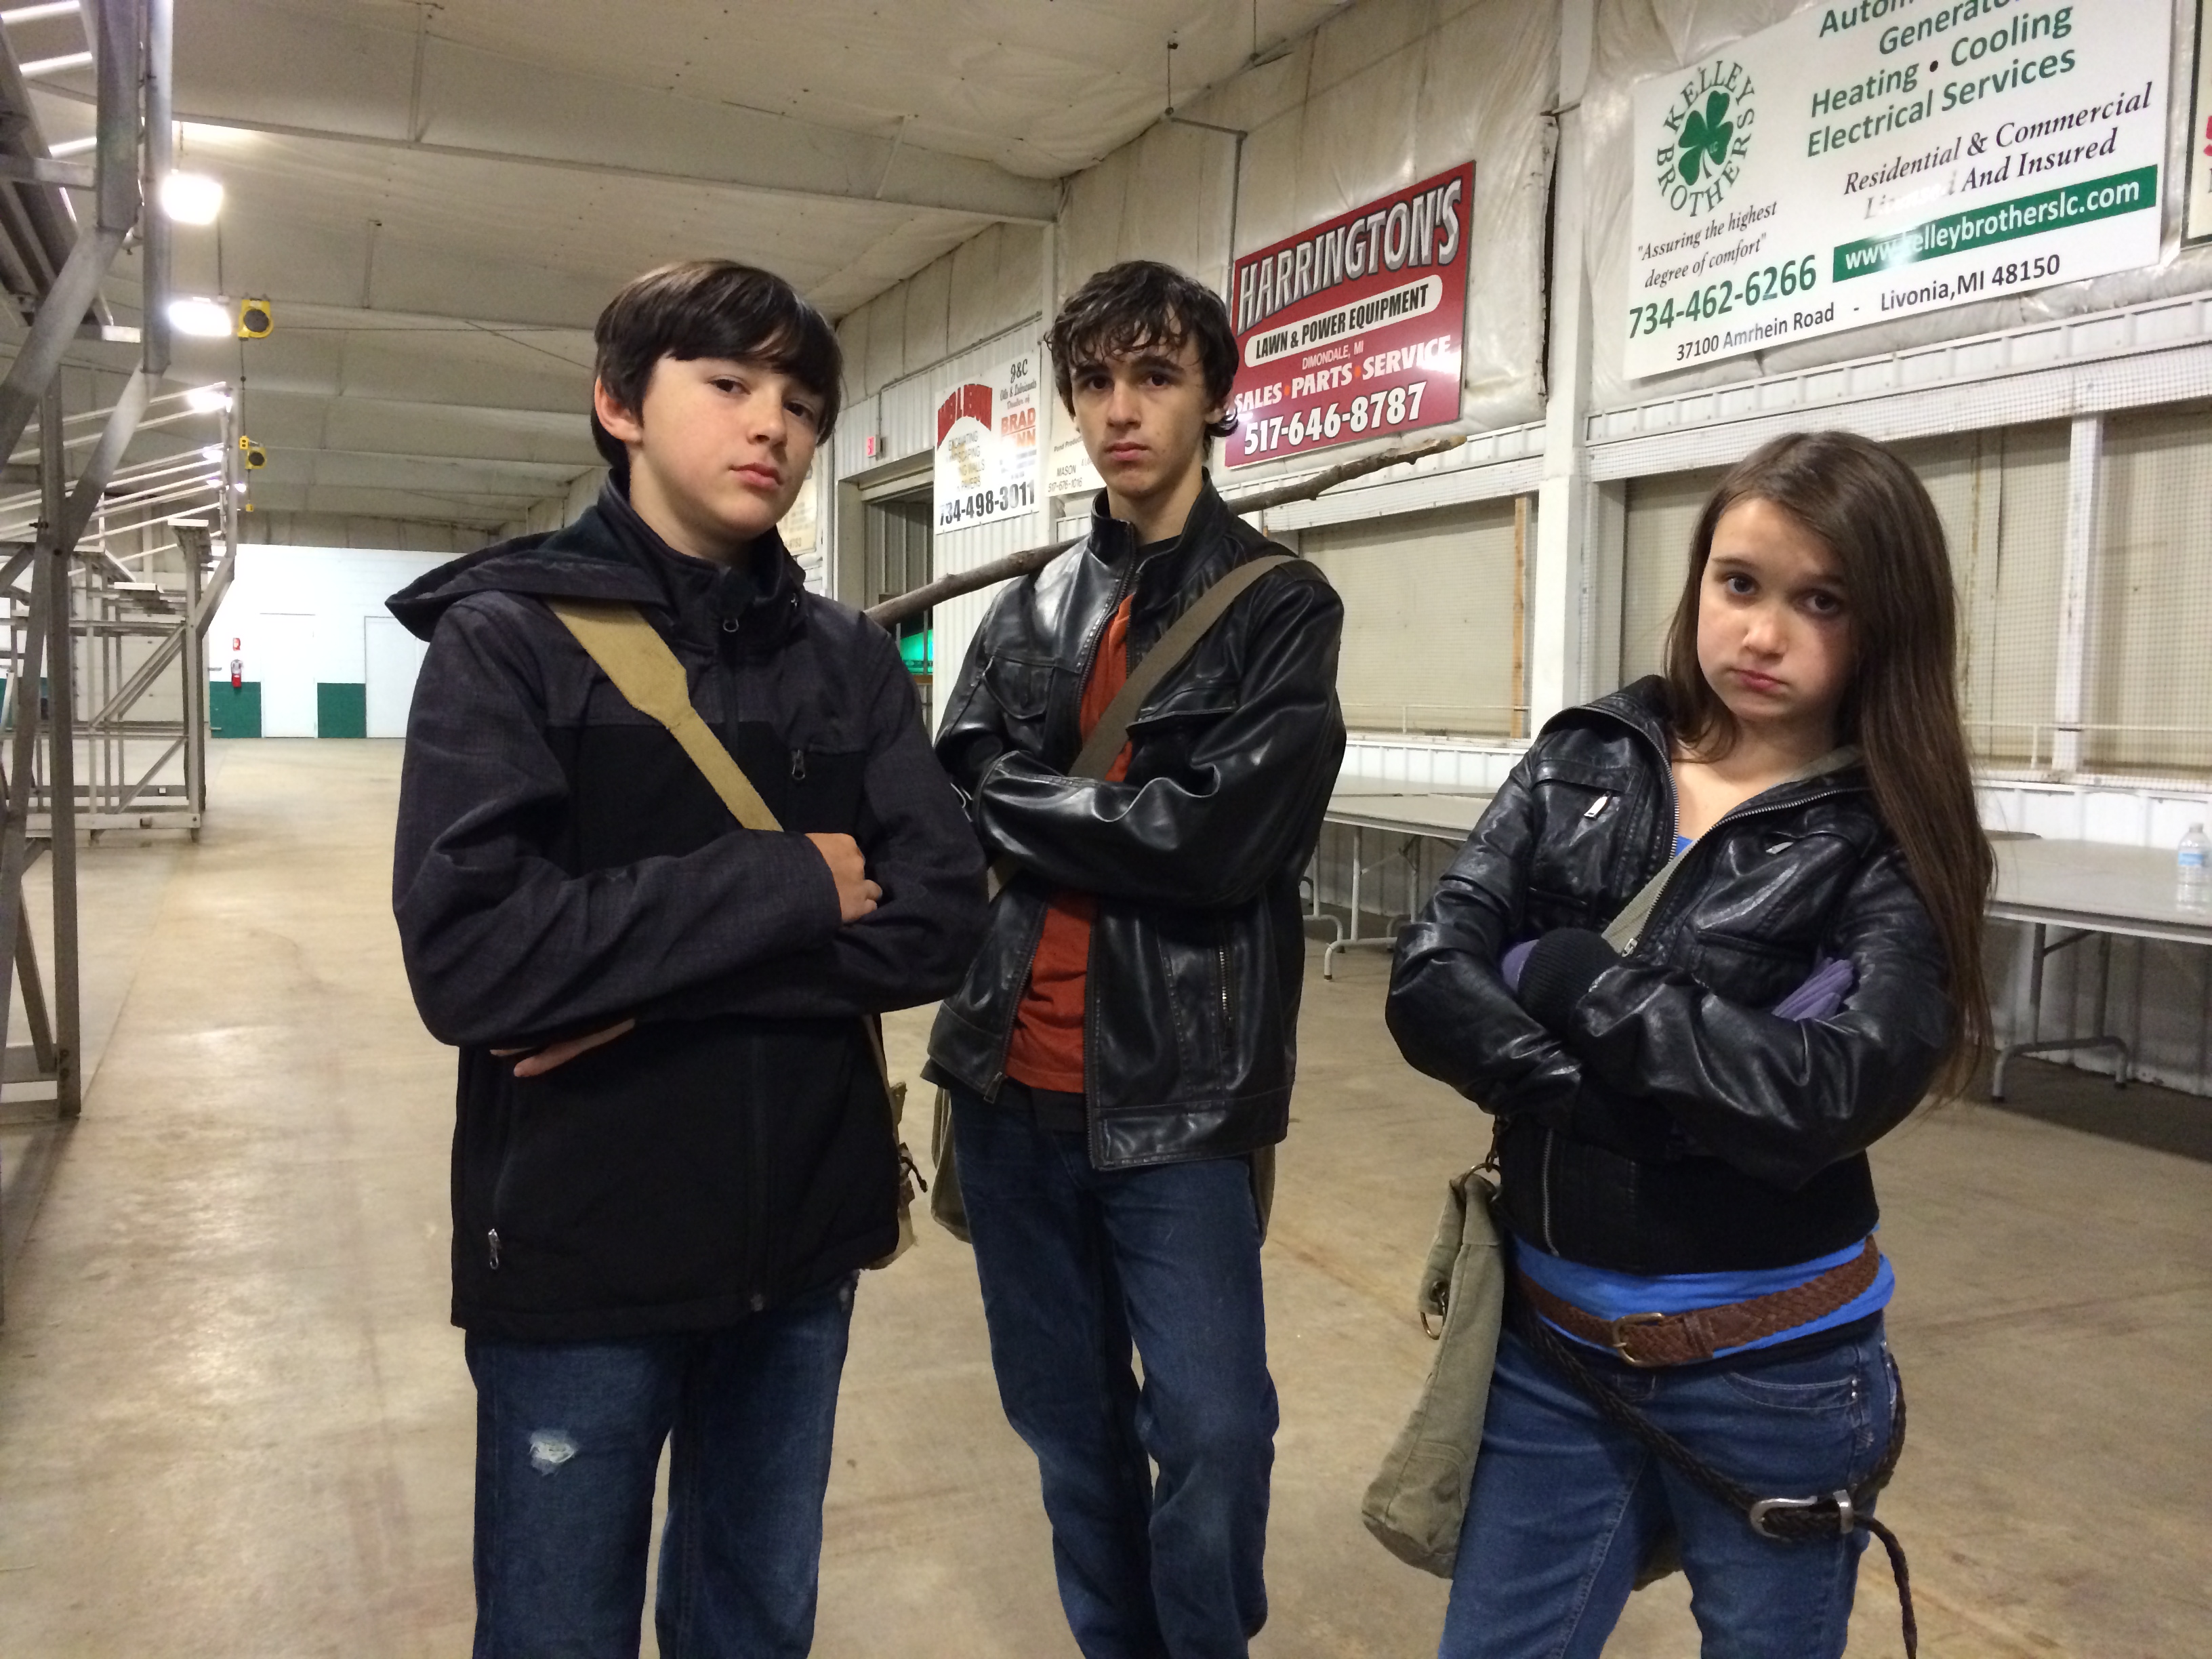 After making it to safety, these three siblings get cleaned up and ready to protect on Necroland. From left to right, Joseph, Jacob and Julia Kate Ouellette